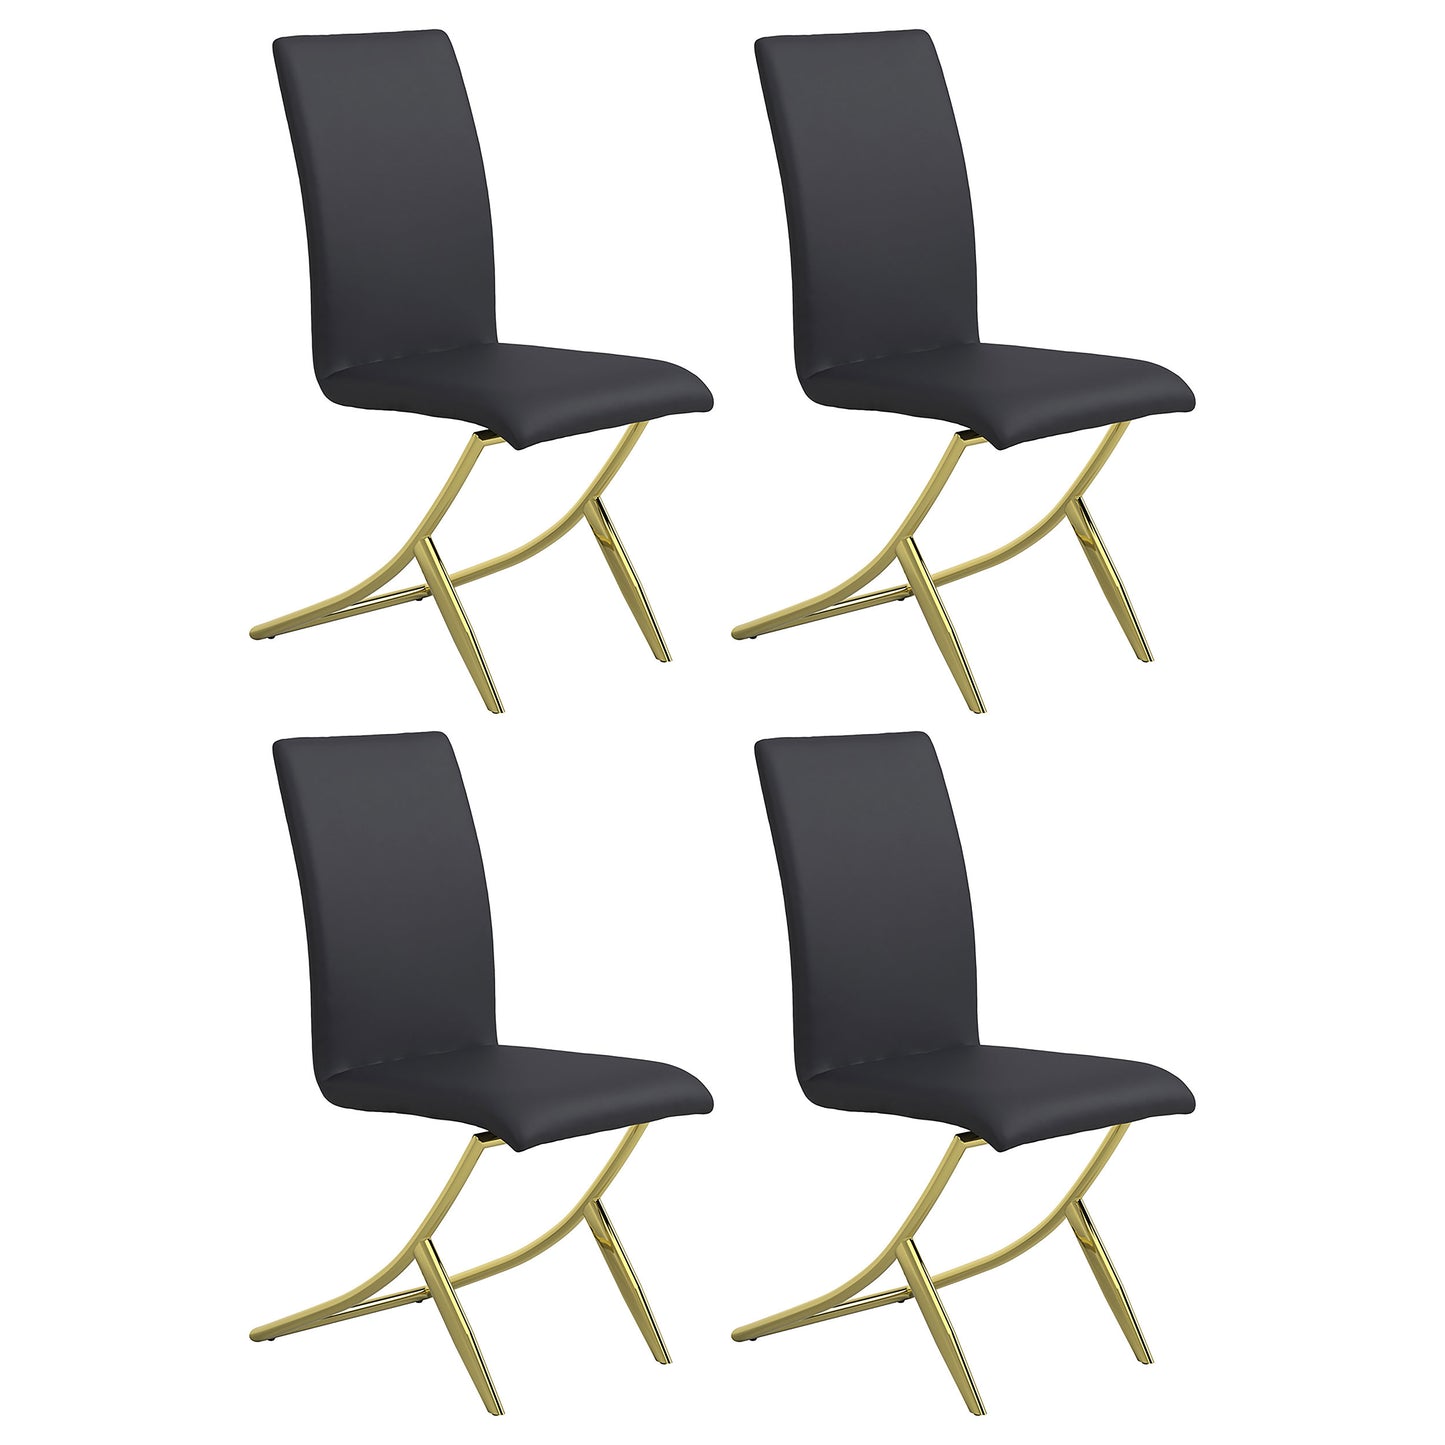 Carmelia Upholstered Side Chairs Black (Set of 4)